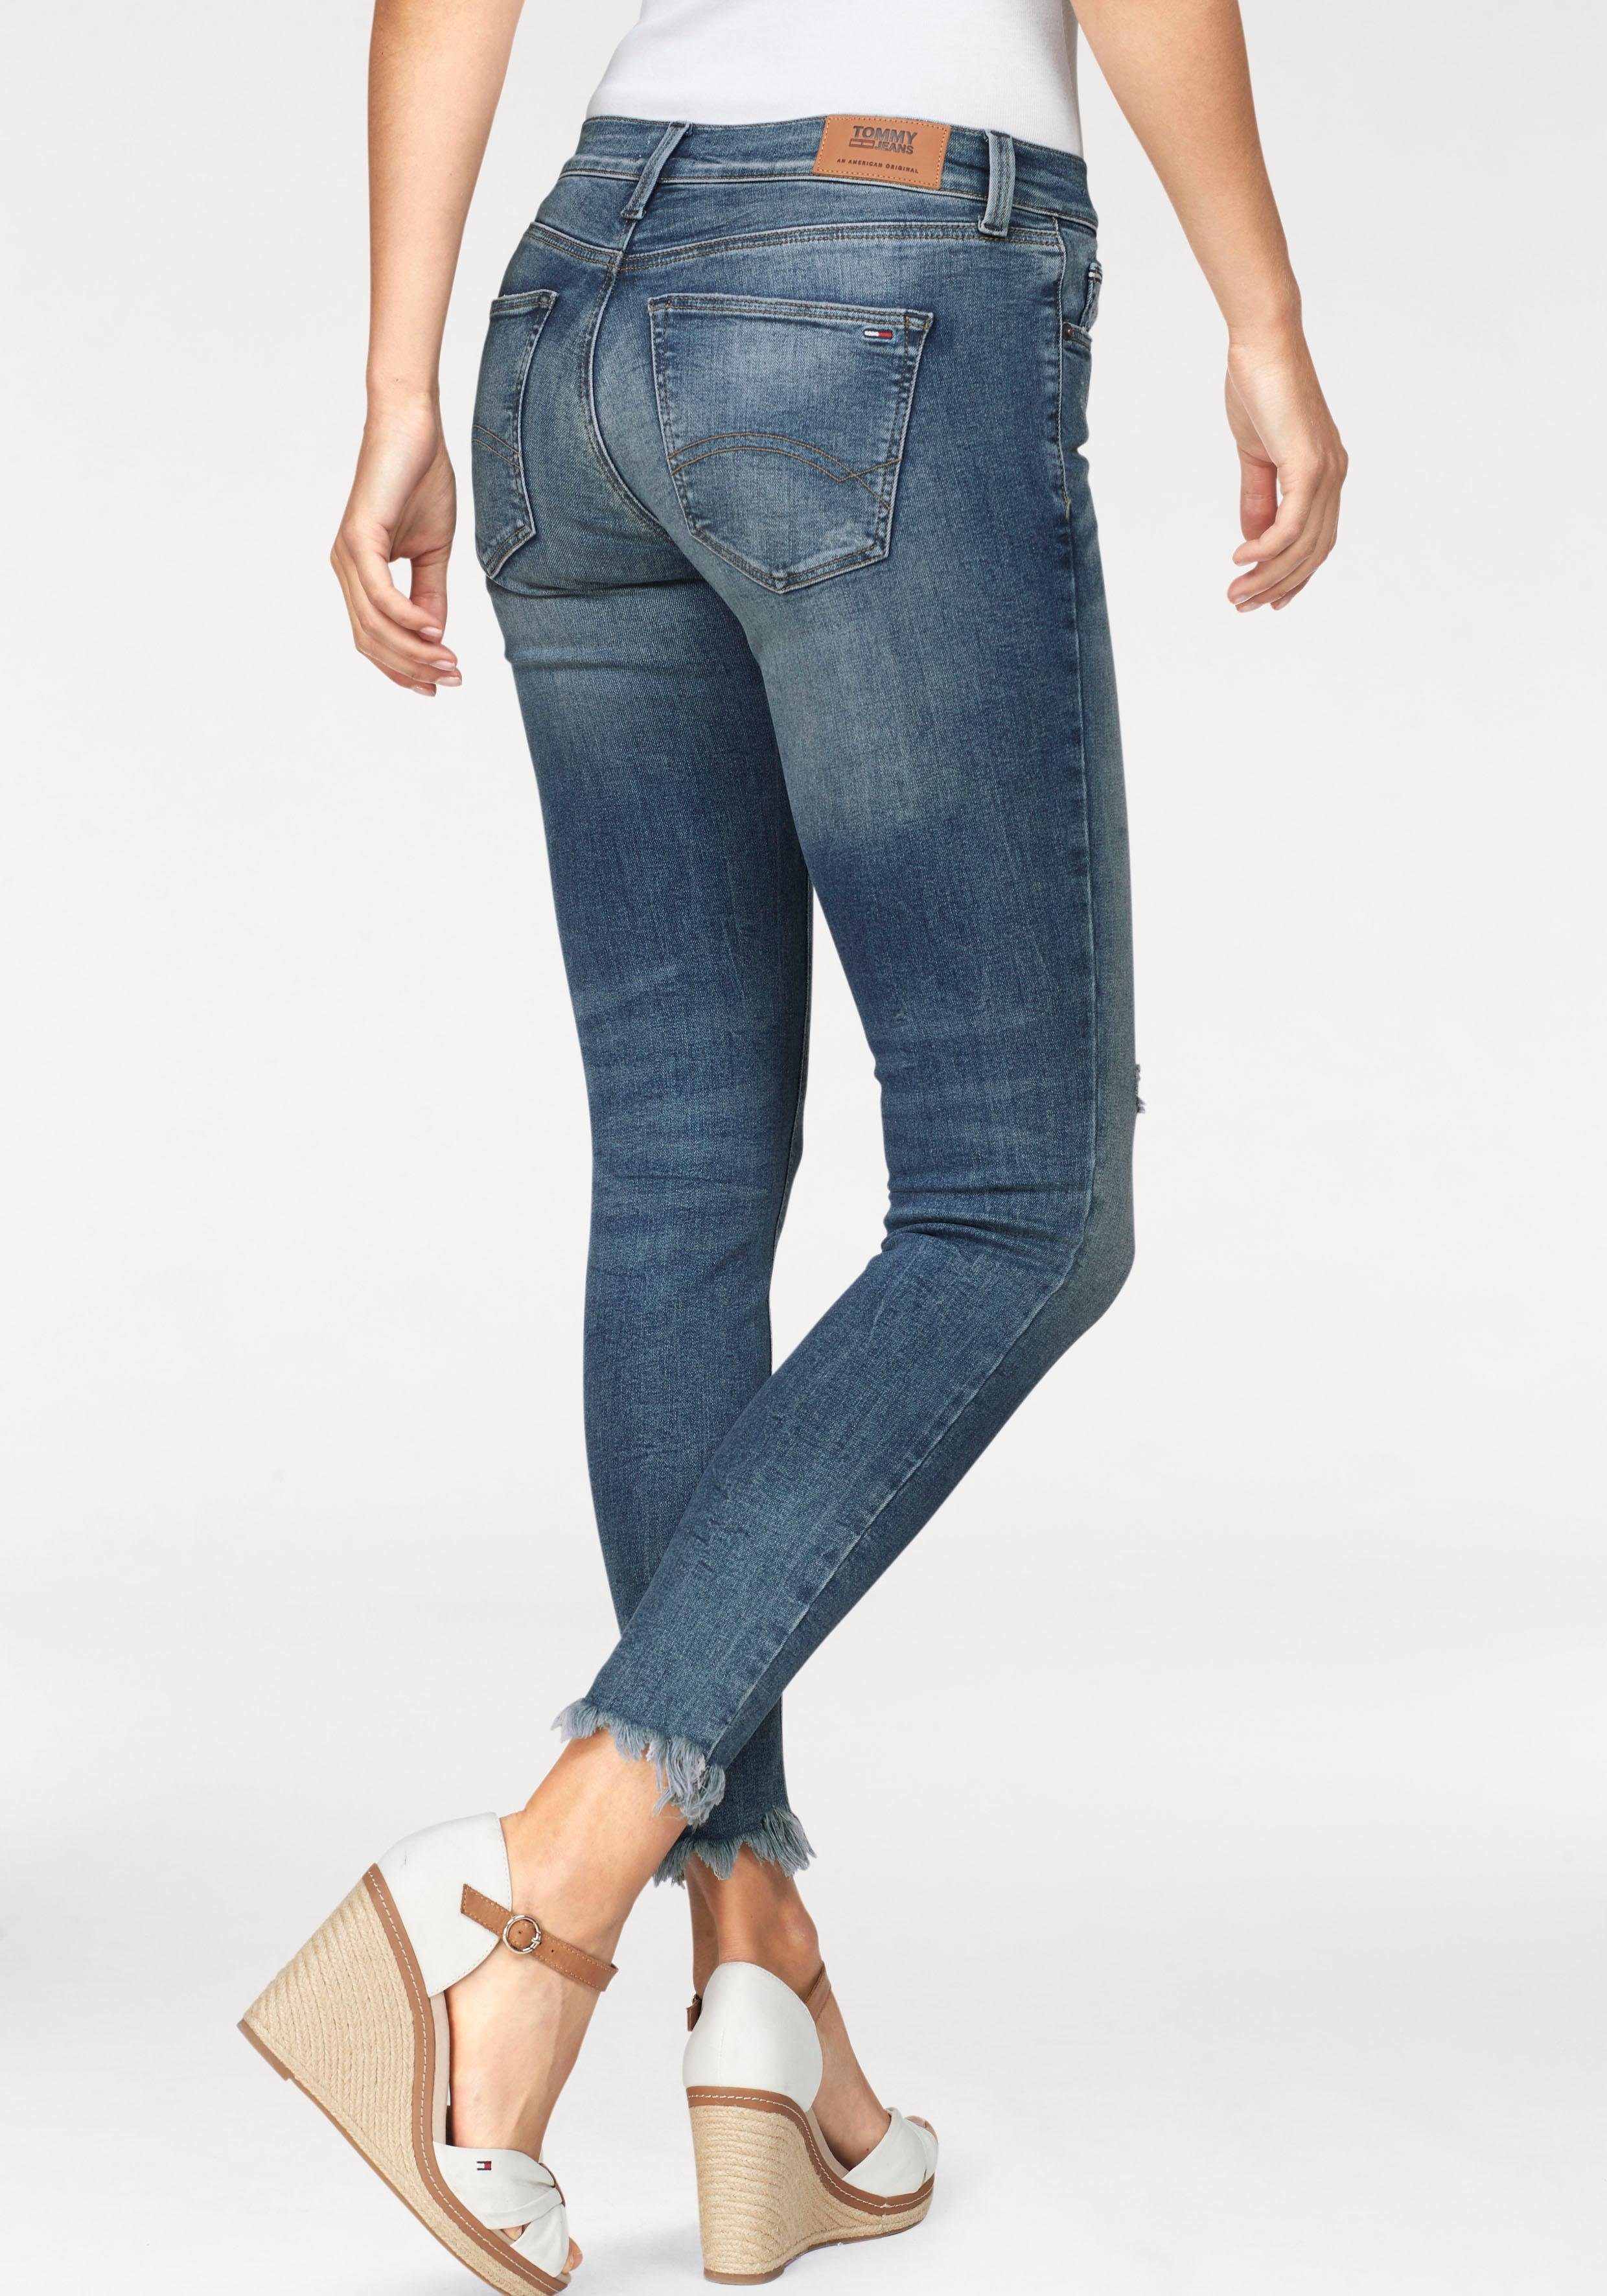 Tommy Jeans Jeans »MID RISE SKINNY NORA 7/8 TMBLST« online kaufen | OTTO